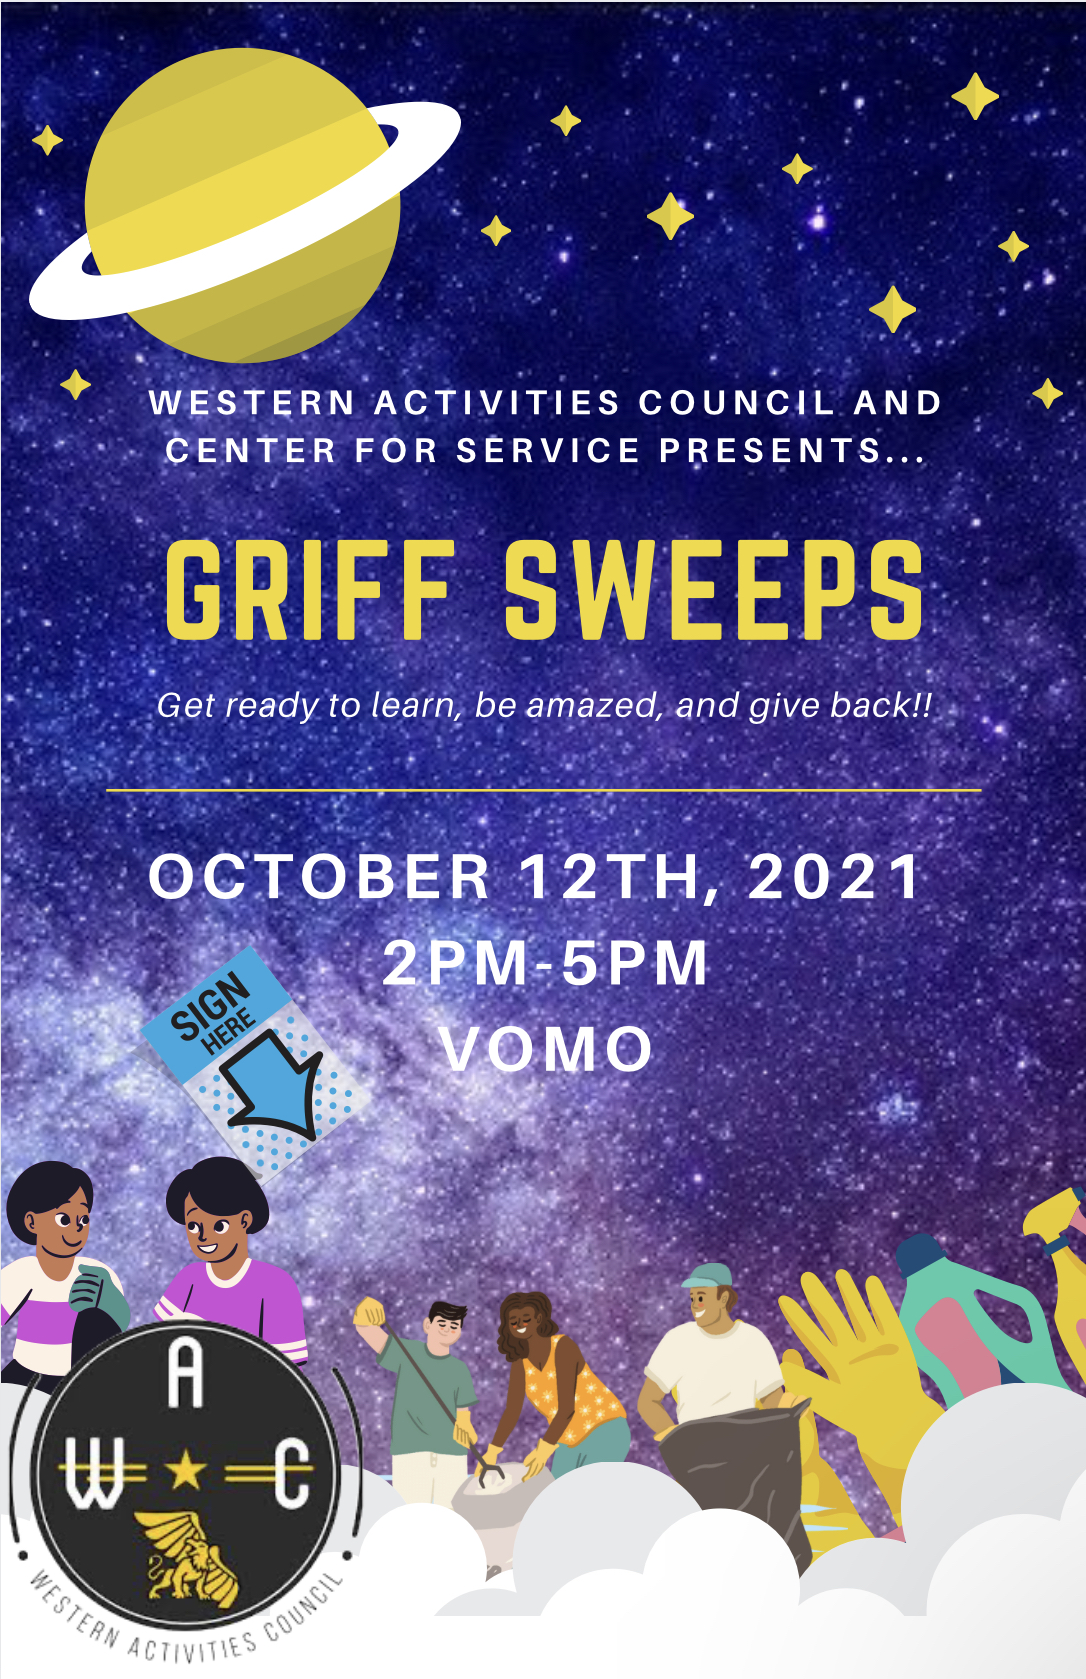 Griff Sweeps logo with event details